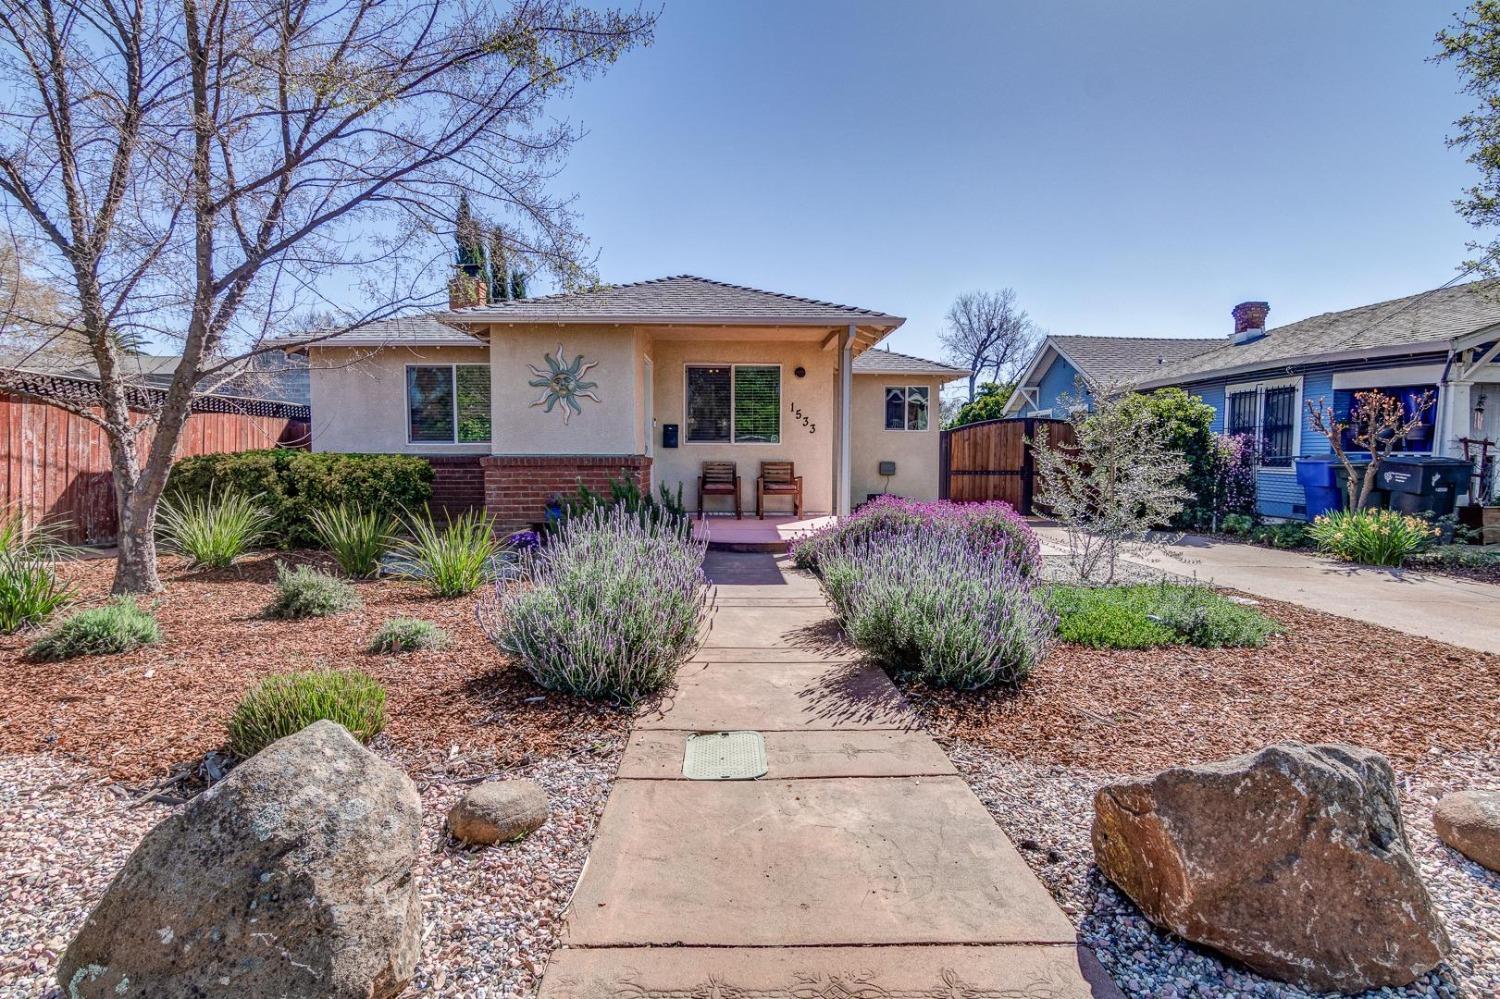 This home offers the best of East Sacramento living! Walking distance to EVERYTHING including Corti 